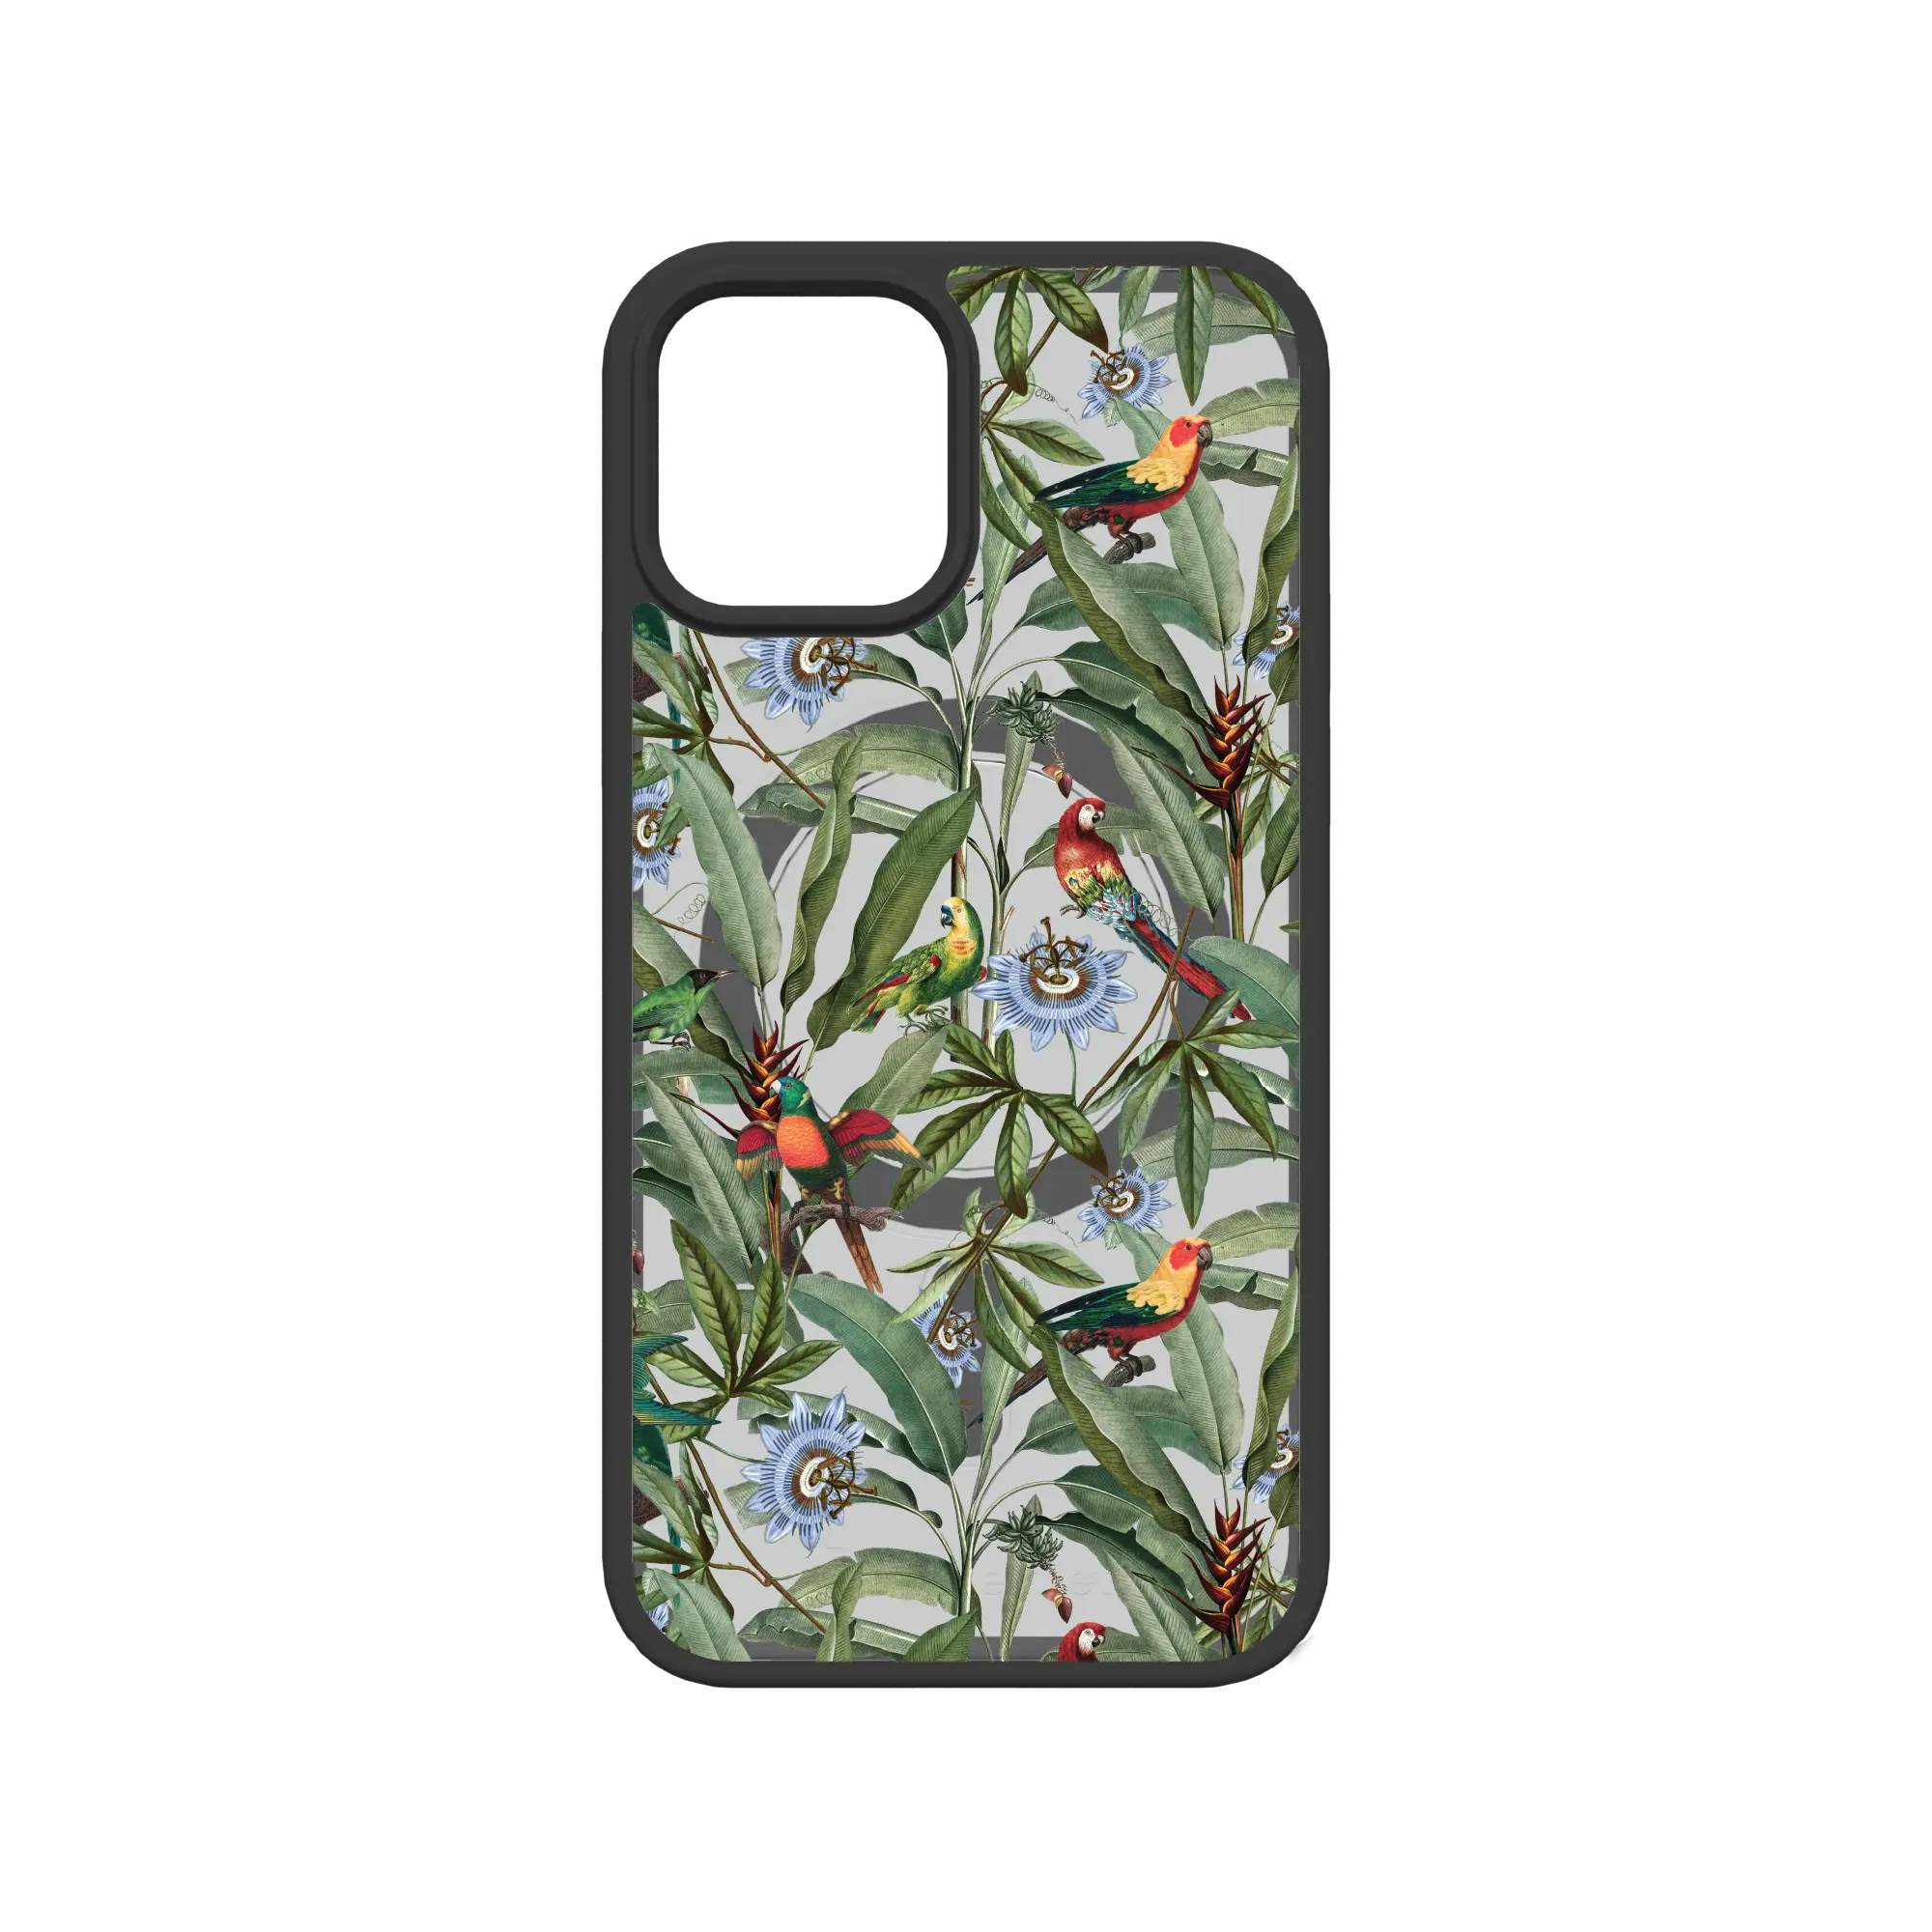 Apple-iPhone-12-12-Pro-Crystal-Clear Parrot Haven | Protective MagSafe Parrot Floral Case | Birds and Bees Collection for Apple iPhone 12 Series cellhelmet cellhelmet